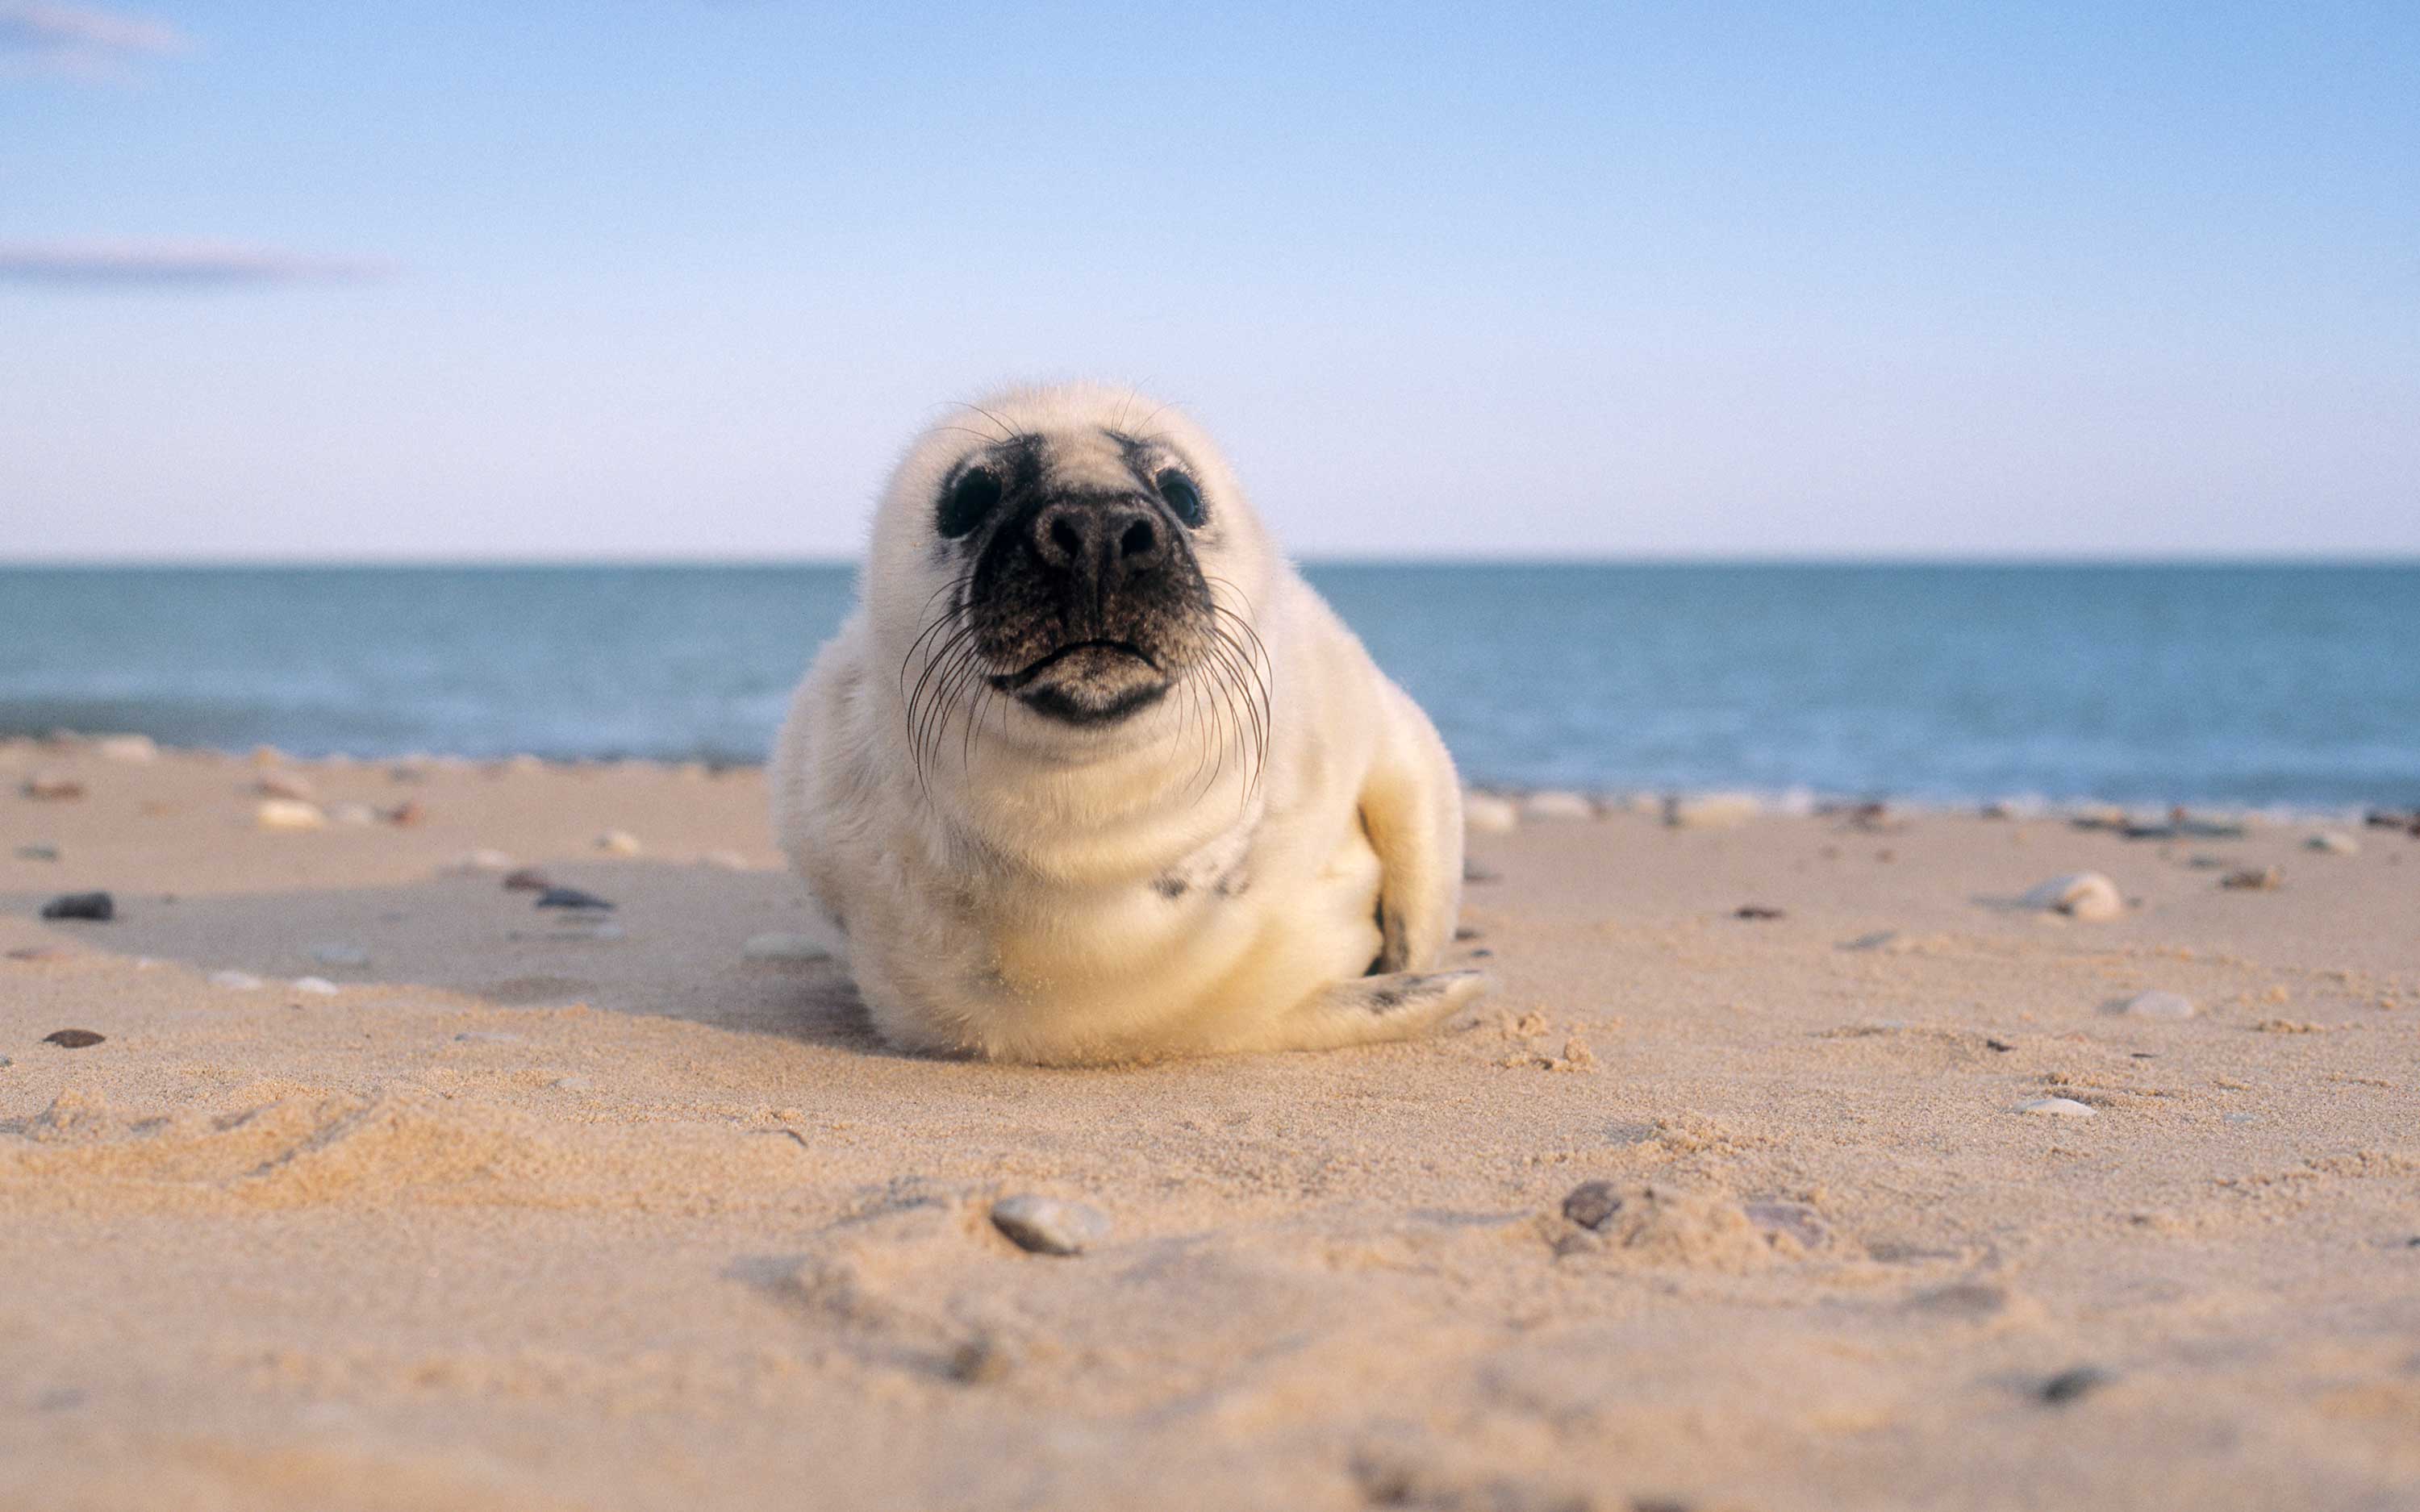 A seal pup layes on a sandy beach with the sea in the background.